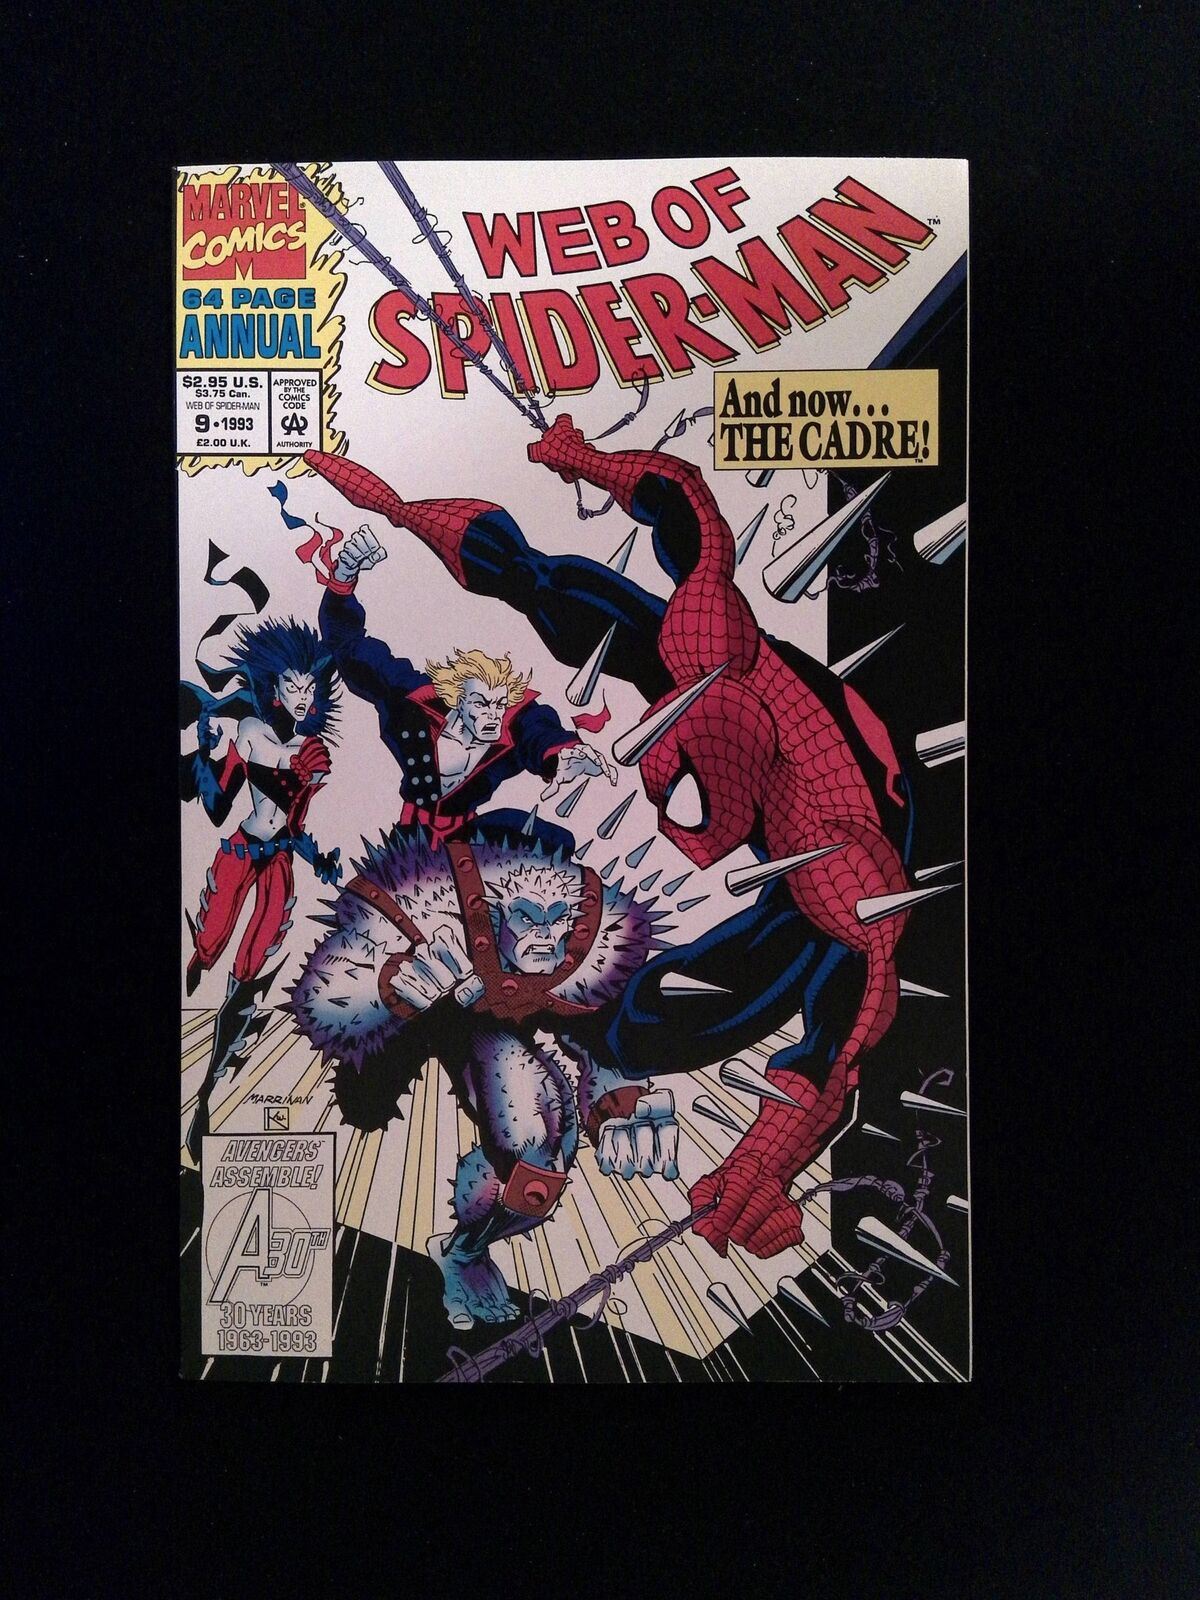 Web of Spider-Man Annual #9 (1993 Marvel Comics) Includes Cadre